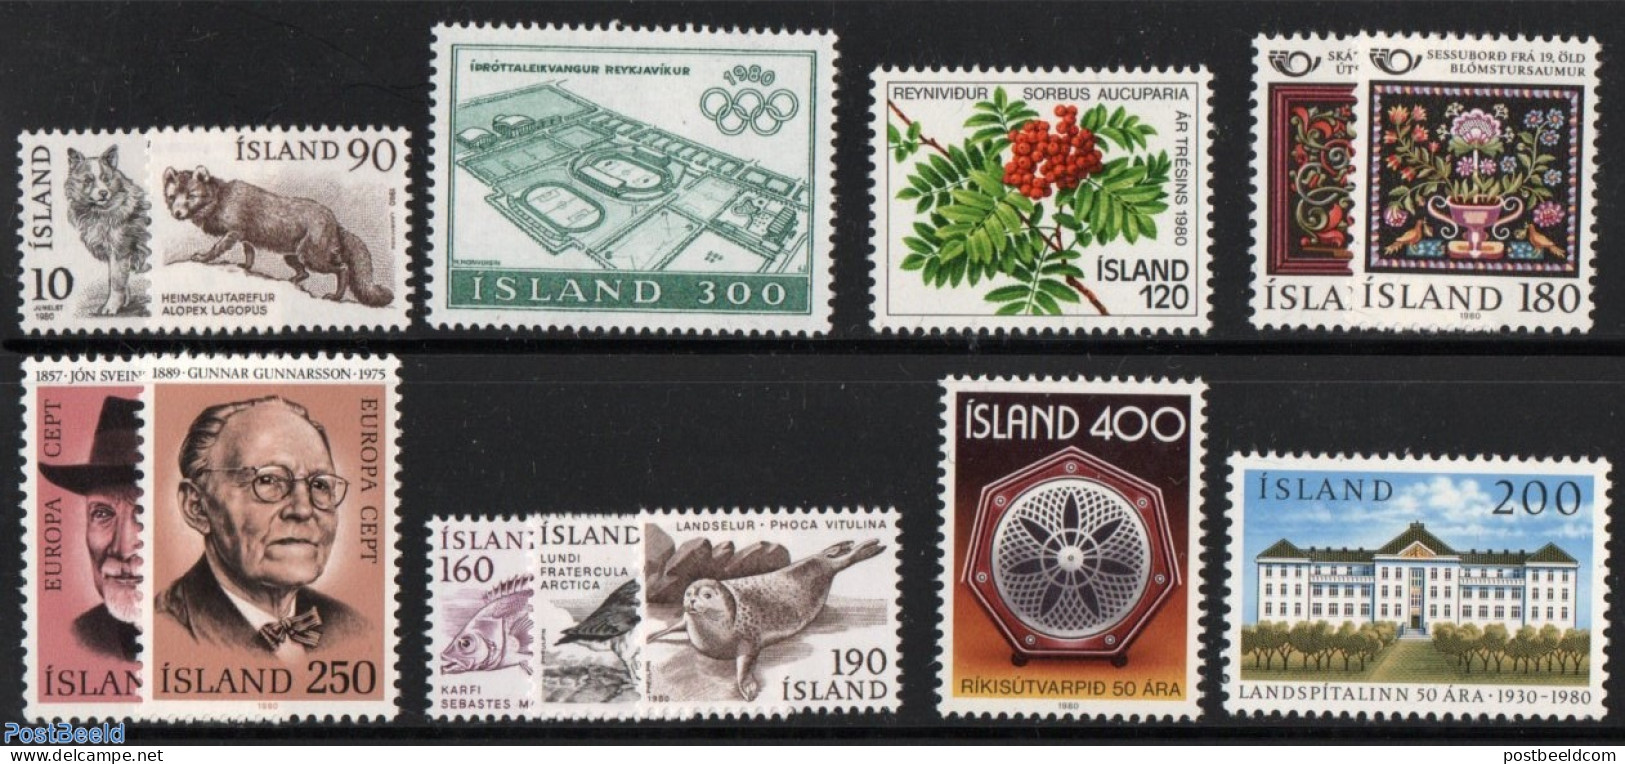 Iceland 1980 Yearset 1980 (13v), Mint NH, Various - Yearsets (by Country) - Nuovi